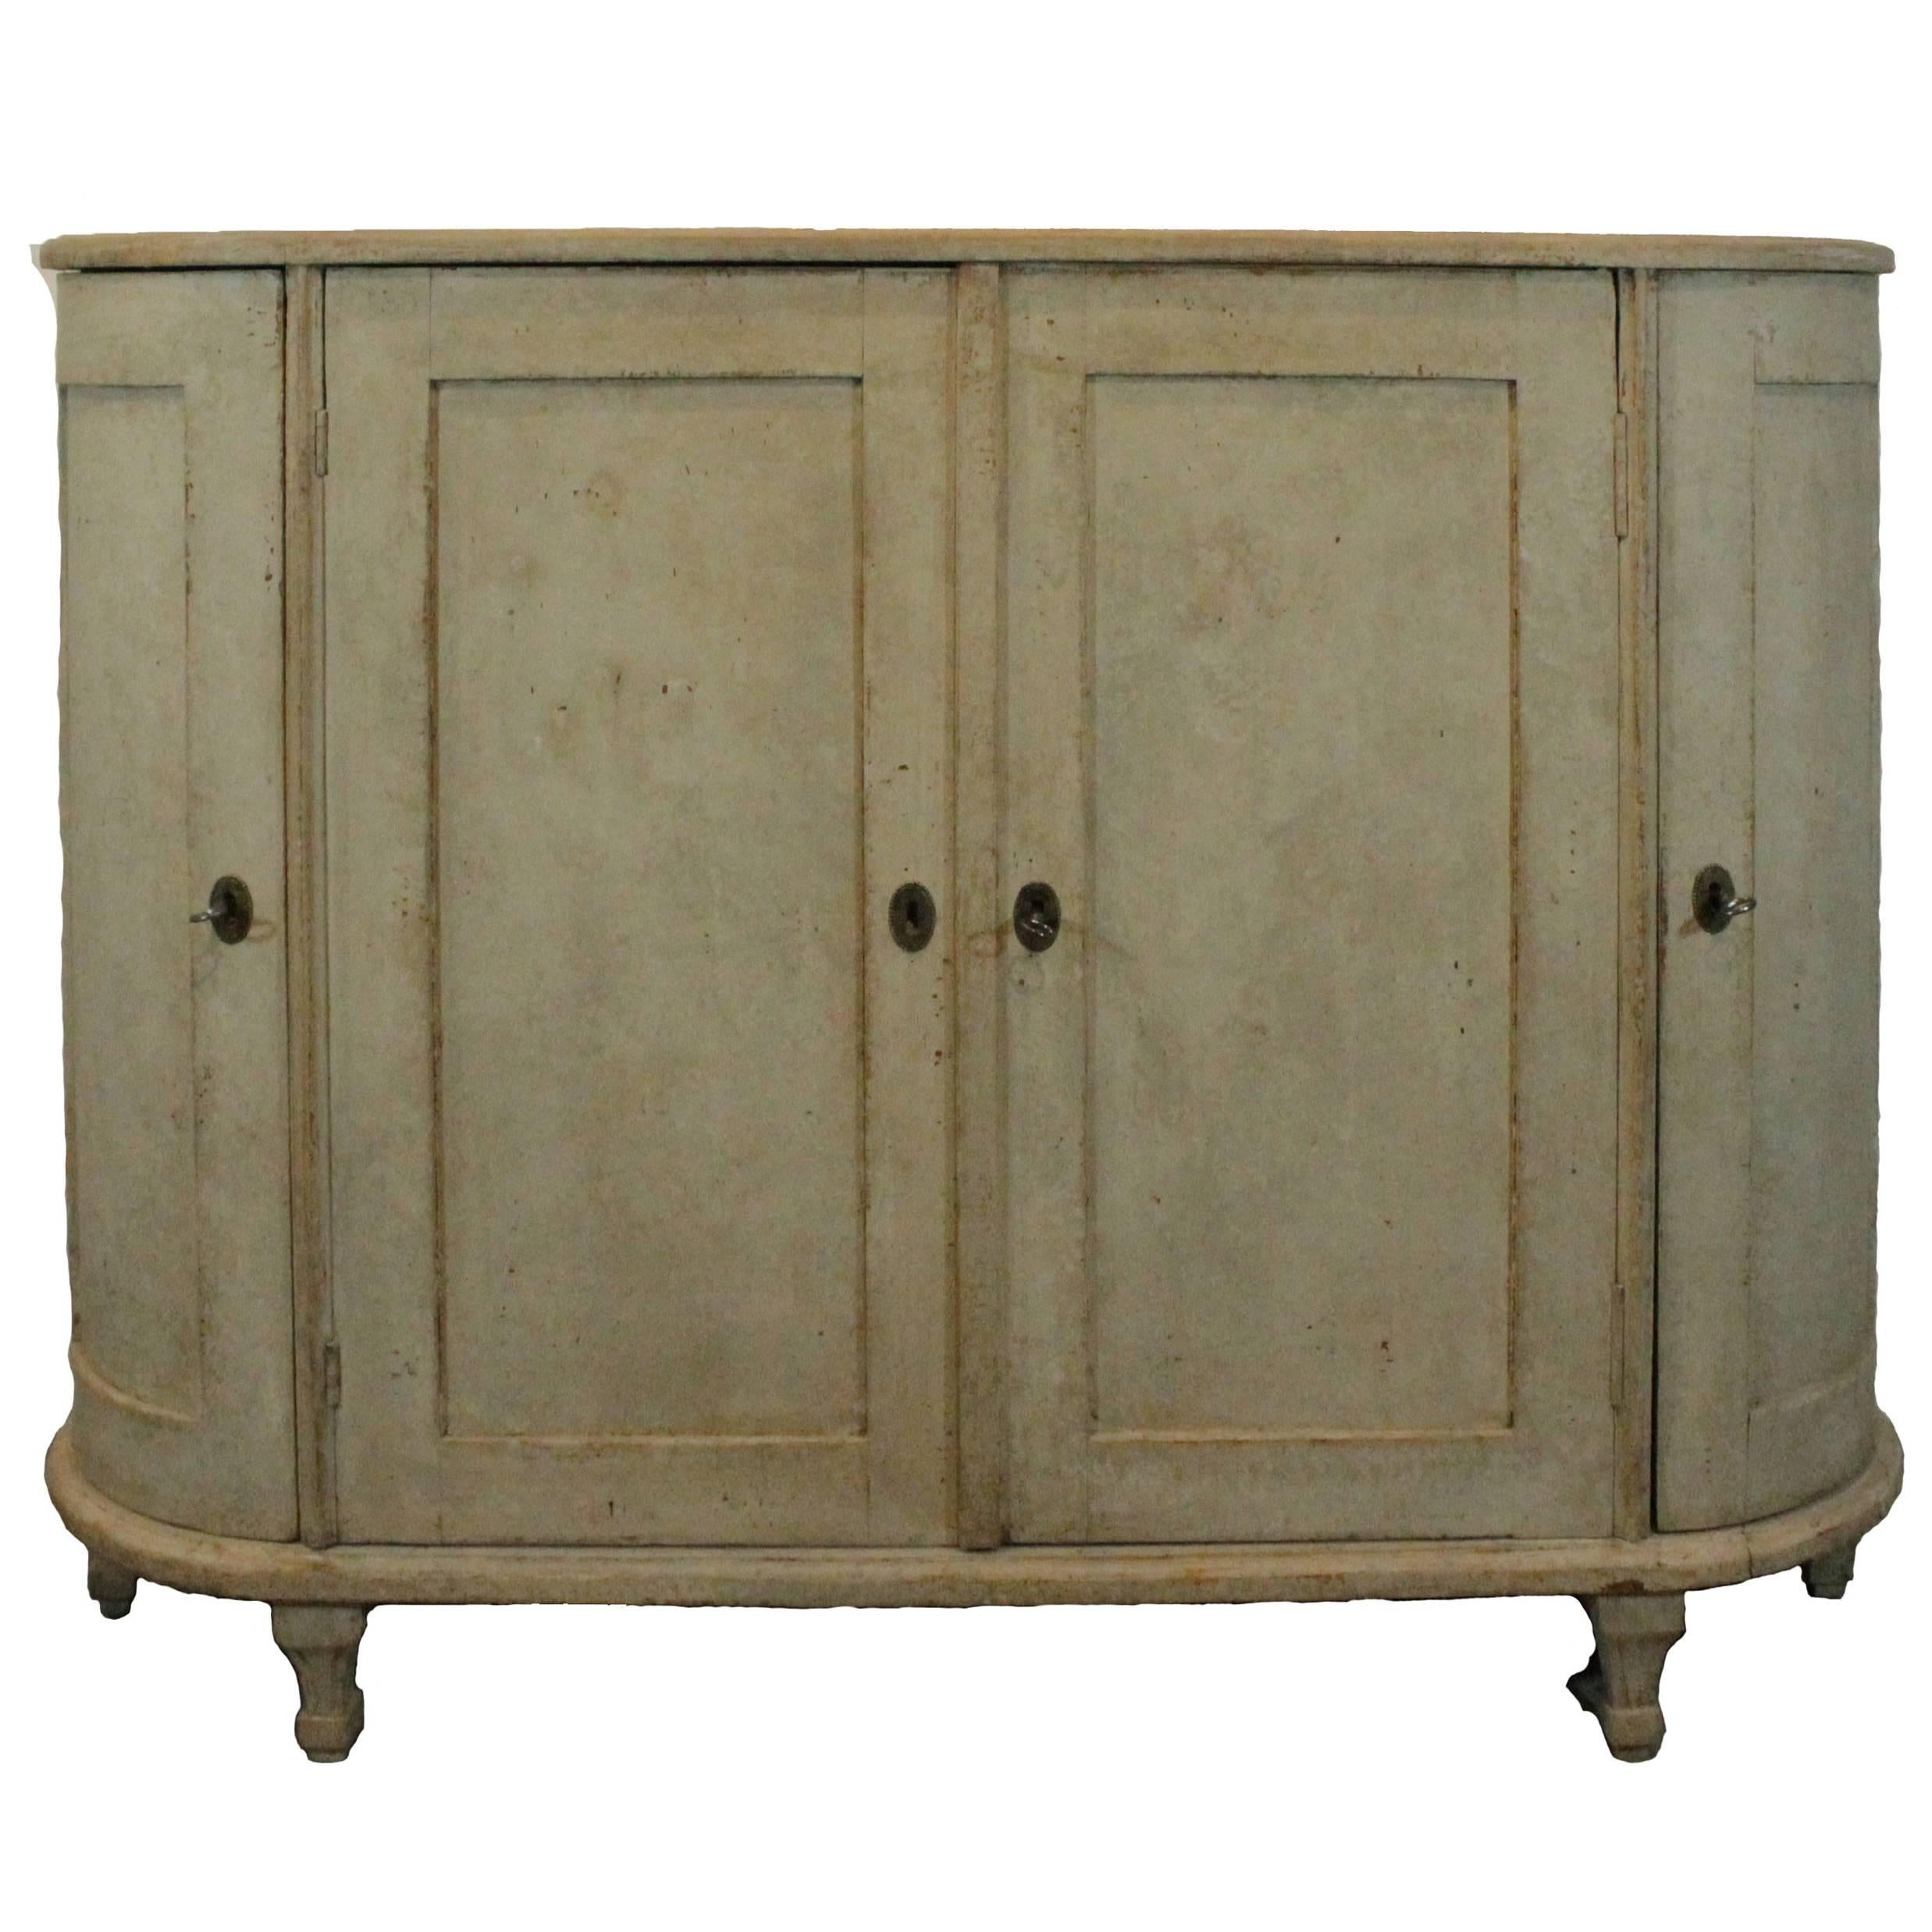 Antique Swedish Sideboard with Curved Sides, Early 19th Century